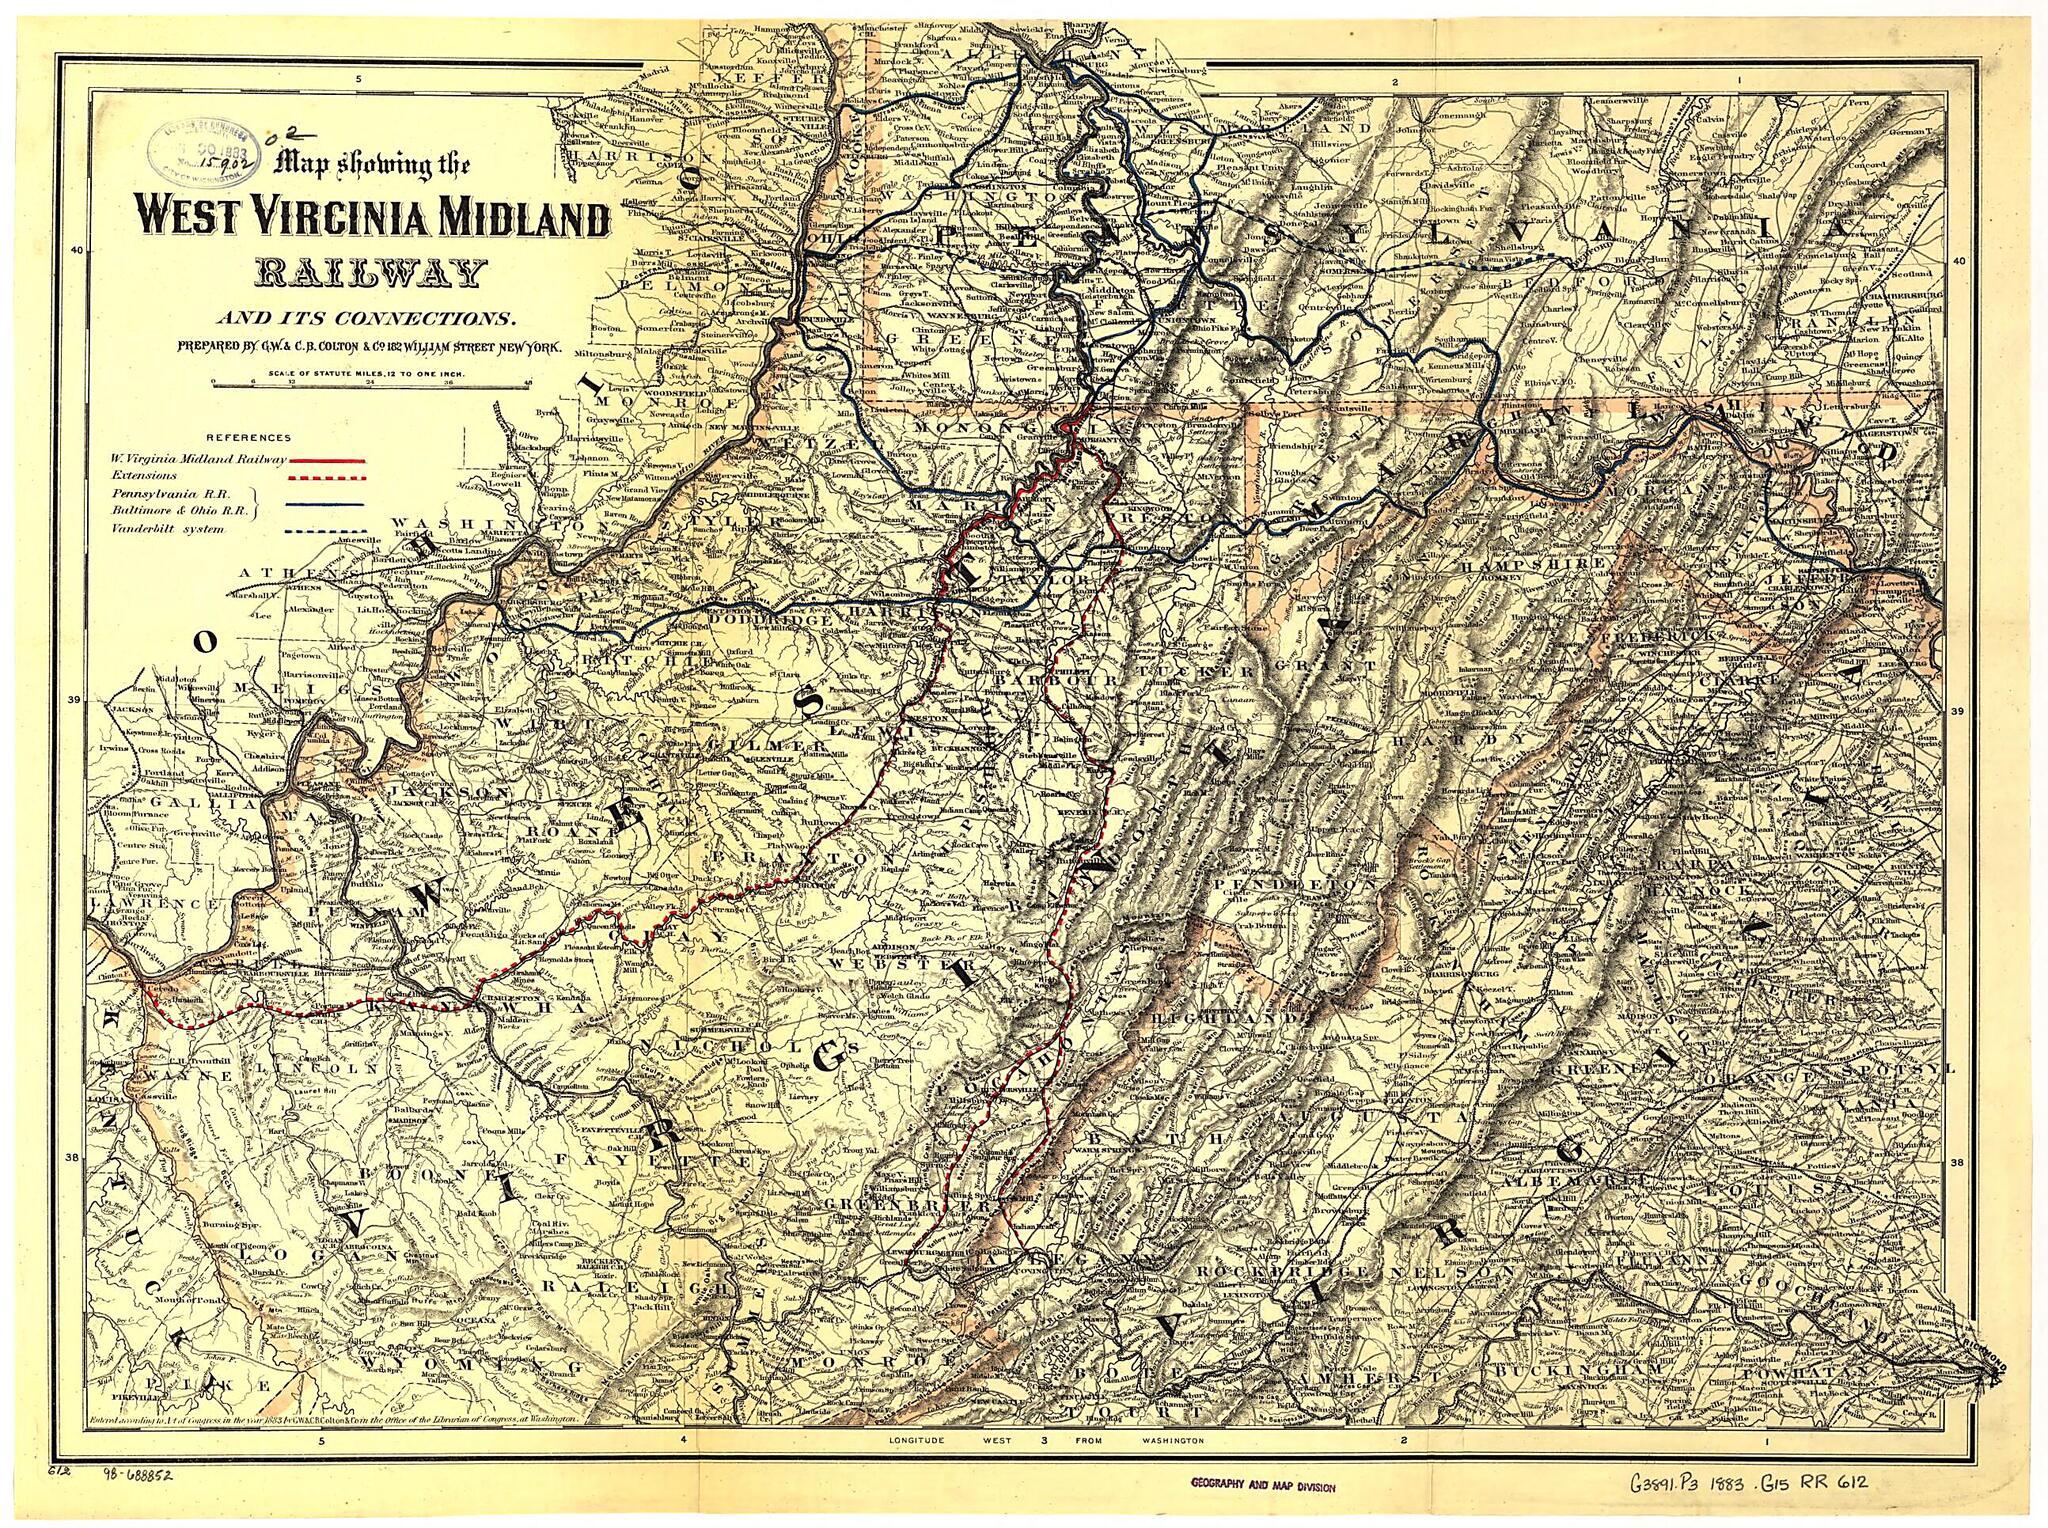 This old map of Map Showing the West Virginia Midland Railway and Its Connections from 1883 was created by  G.W. &amp; C.B. Colton &amp; Co,  West Virginia Midland Railroad in 1883